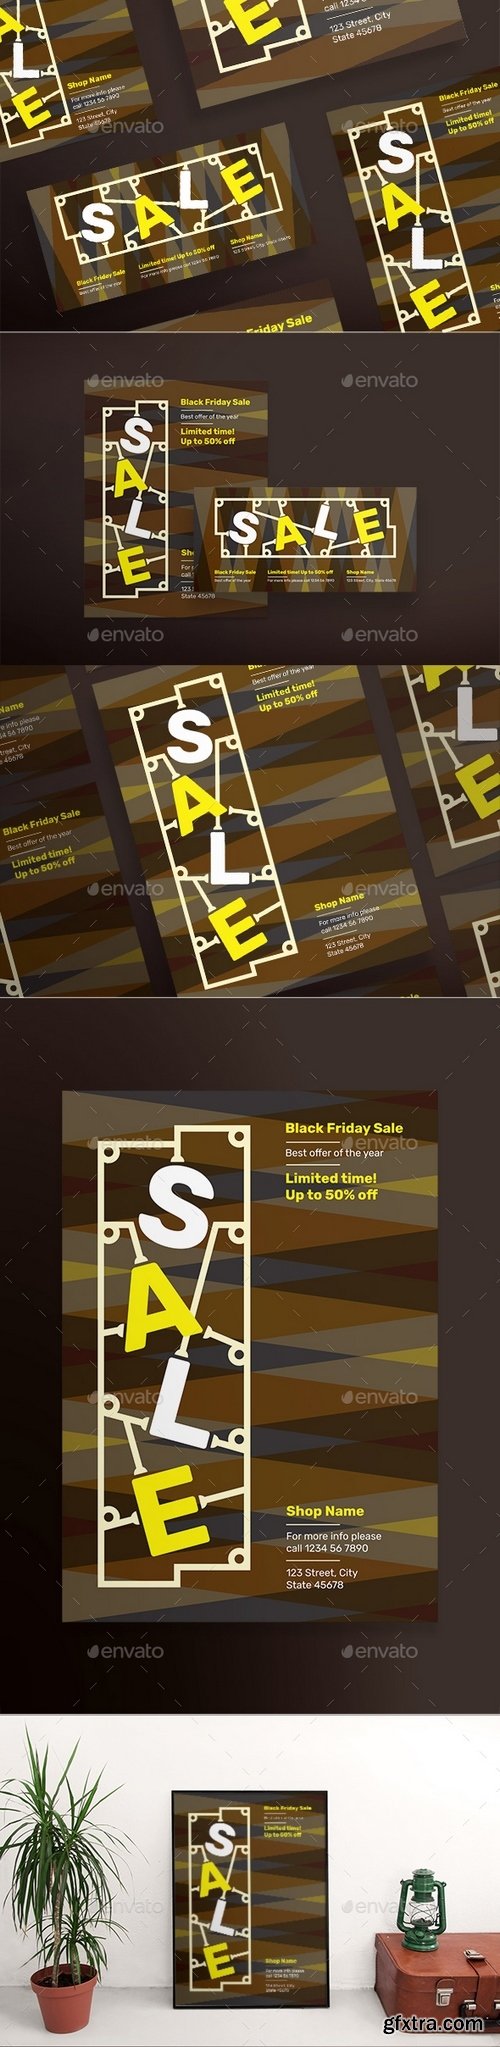 Graphicriver - Black Friday Flyers 20823784